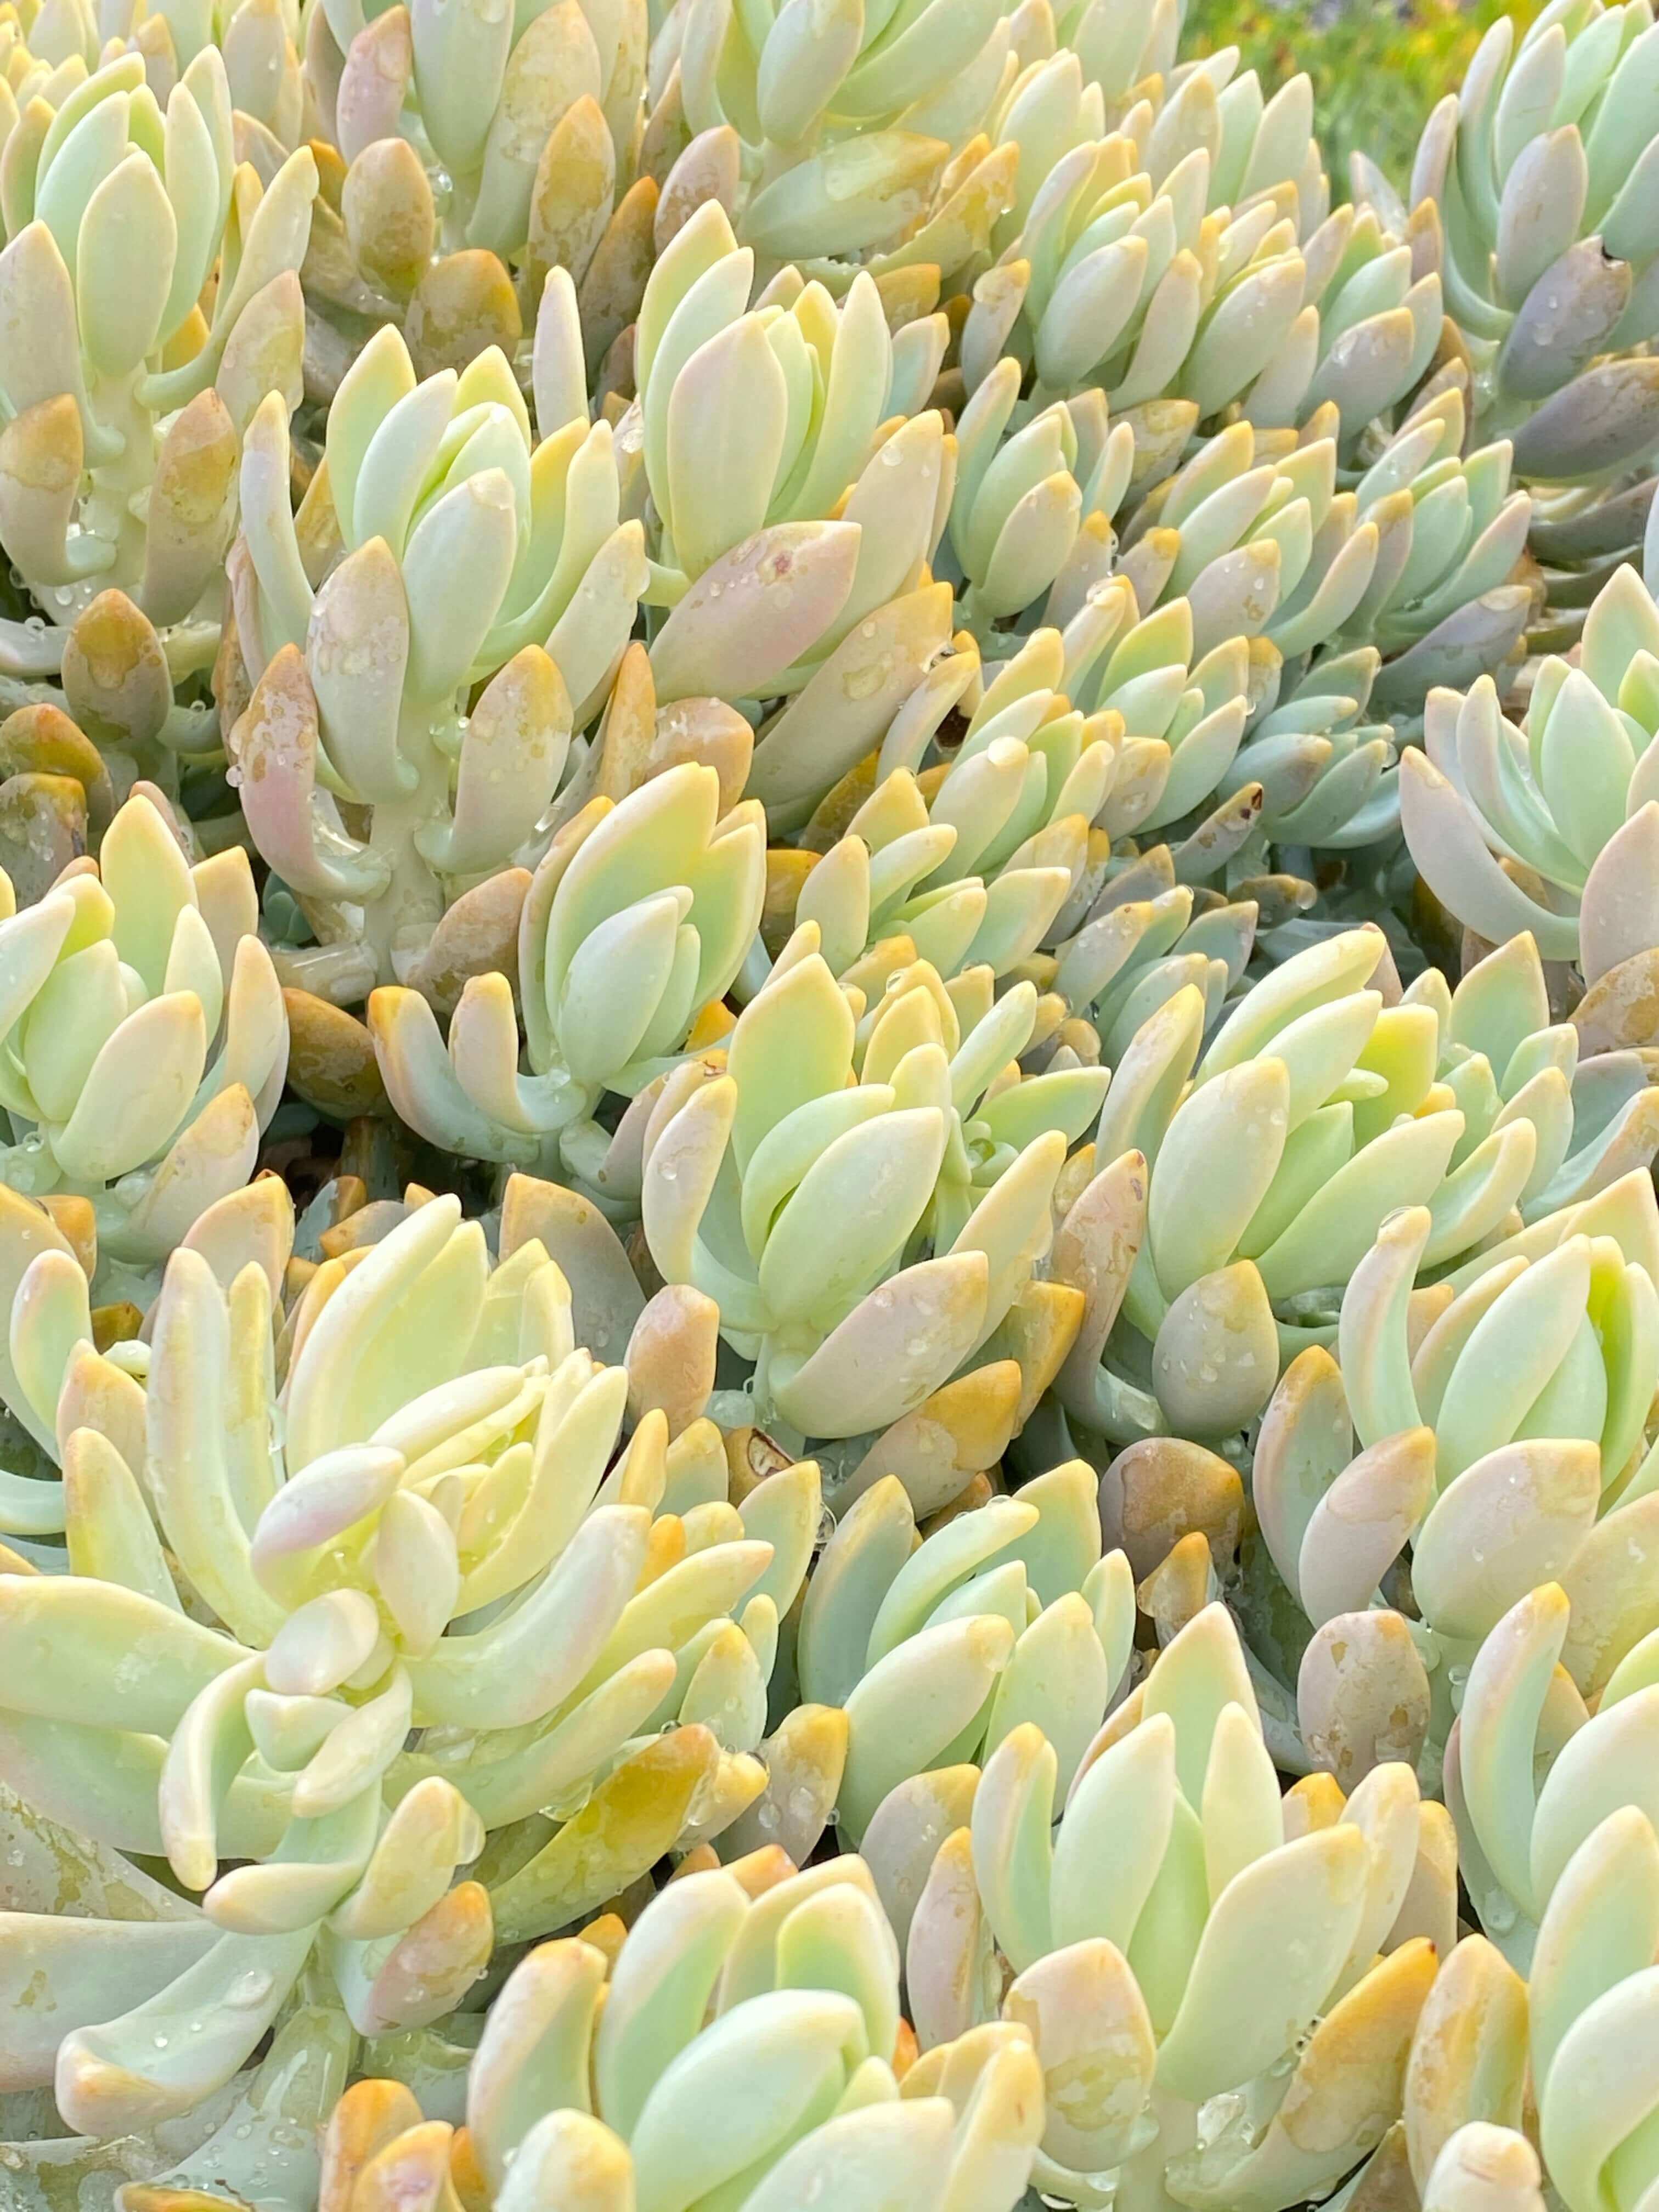 Detailed close-up of a single variety of succulent cutting, emphasizing its unique texture and color.